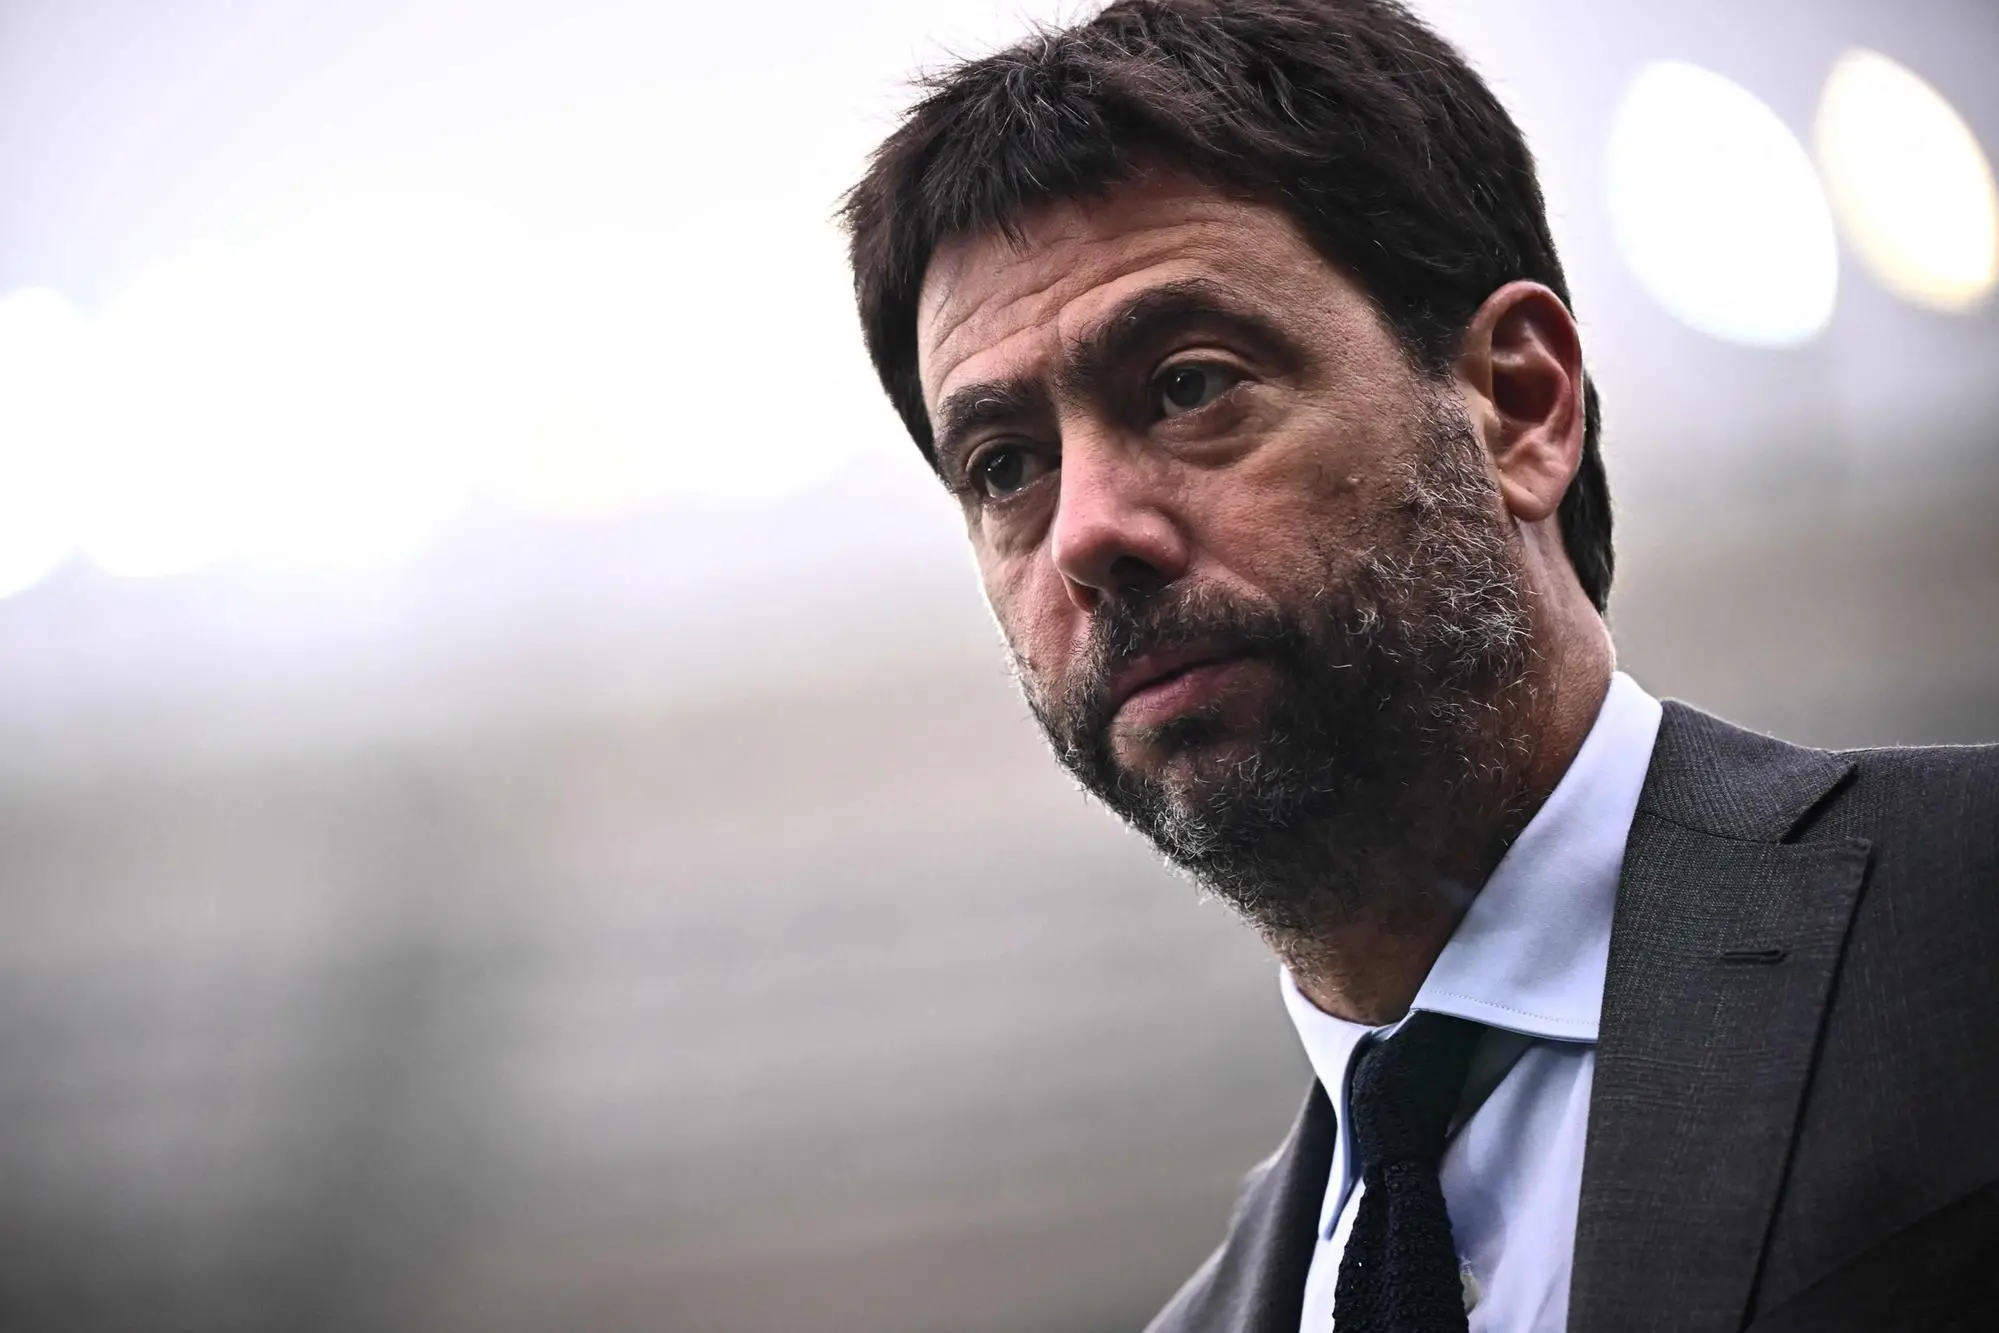 (FILES) Juventus' then president Andrea Agnelli attends the Italian Serie A football match between Torino and Juventus on October 15, 2022 at the Olympic stadium in Turin. Juventus on May 22, 2023 were given a 10-point deduction in Serie A after a revision of their initial 15-point penalty inflicted on the club over illicit transfer activity. Long bans given to former chairman Andrea Agnelli, ex-CEO Maurizio Arrivabene and sporting directors Federico Cherubini and Fabio Paratici were upheld in April. (Photo by Marco BERTORELLO / AFP)